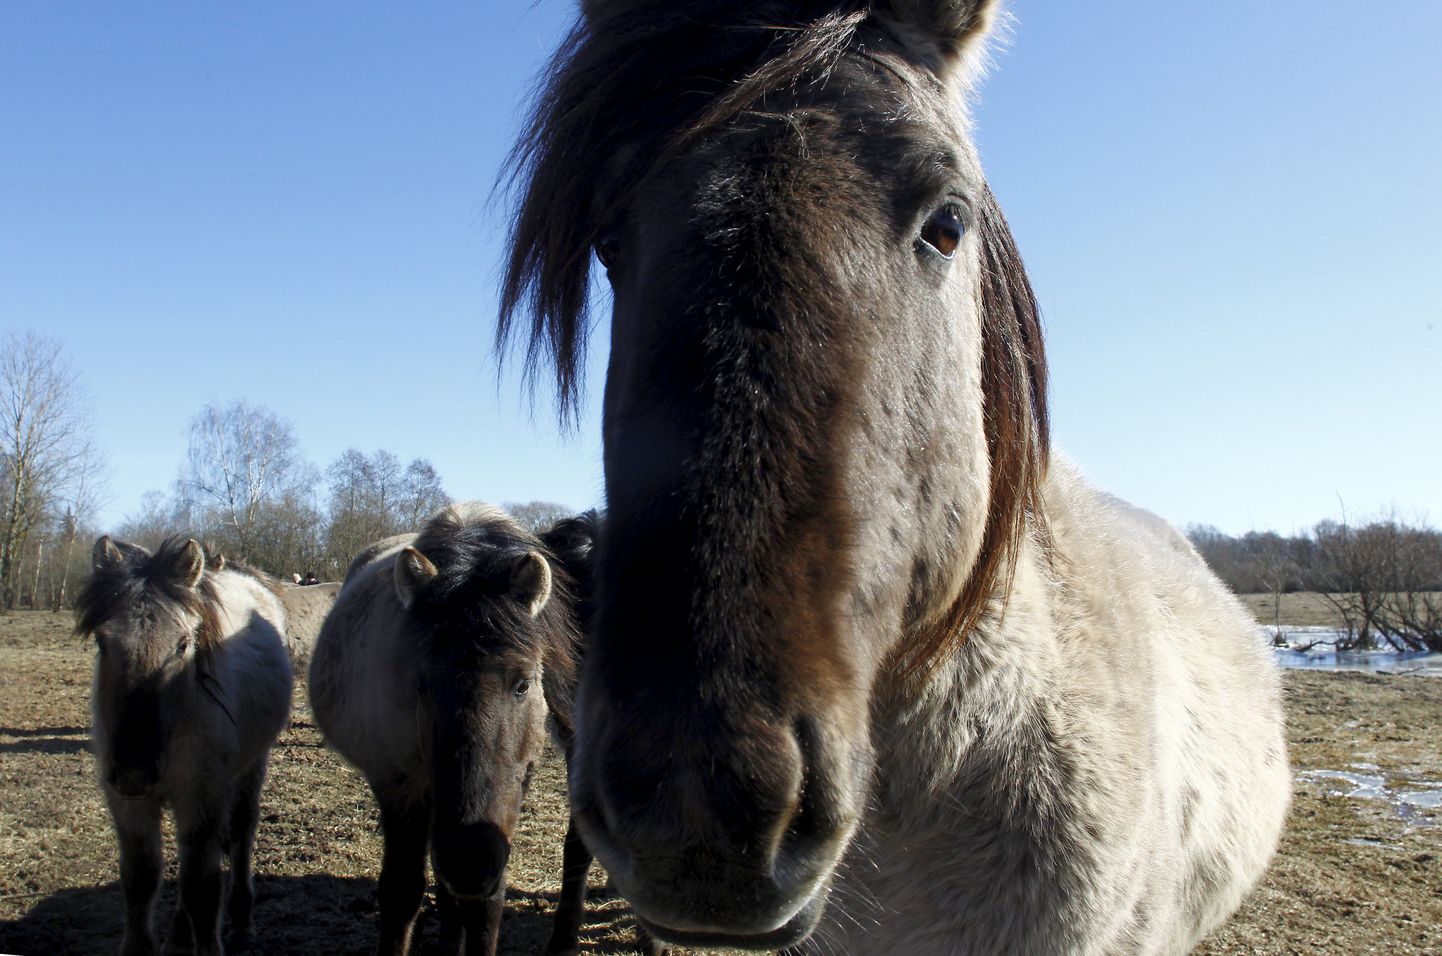 A view of wild horses at the Pilssala natural reserve in Jelgava, Latvia, 18 March 2018. The animals were imported from The Netherlands to keep floodplain meadows from overgrowing.  EPA/TOMS KALNINS